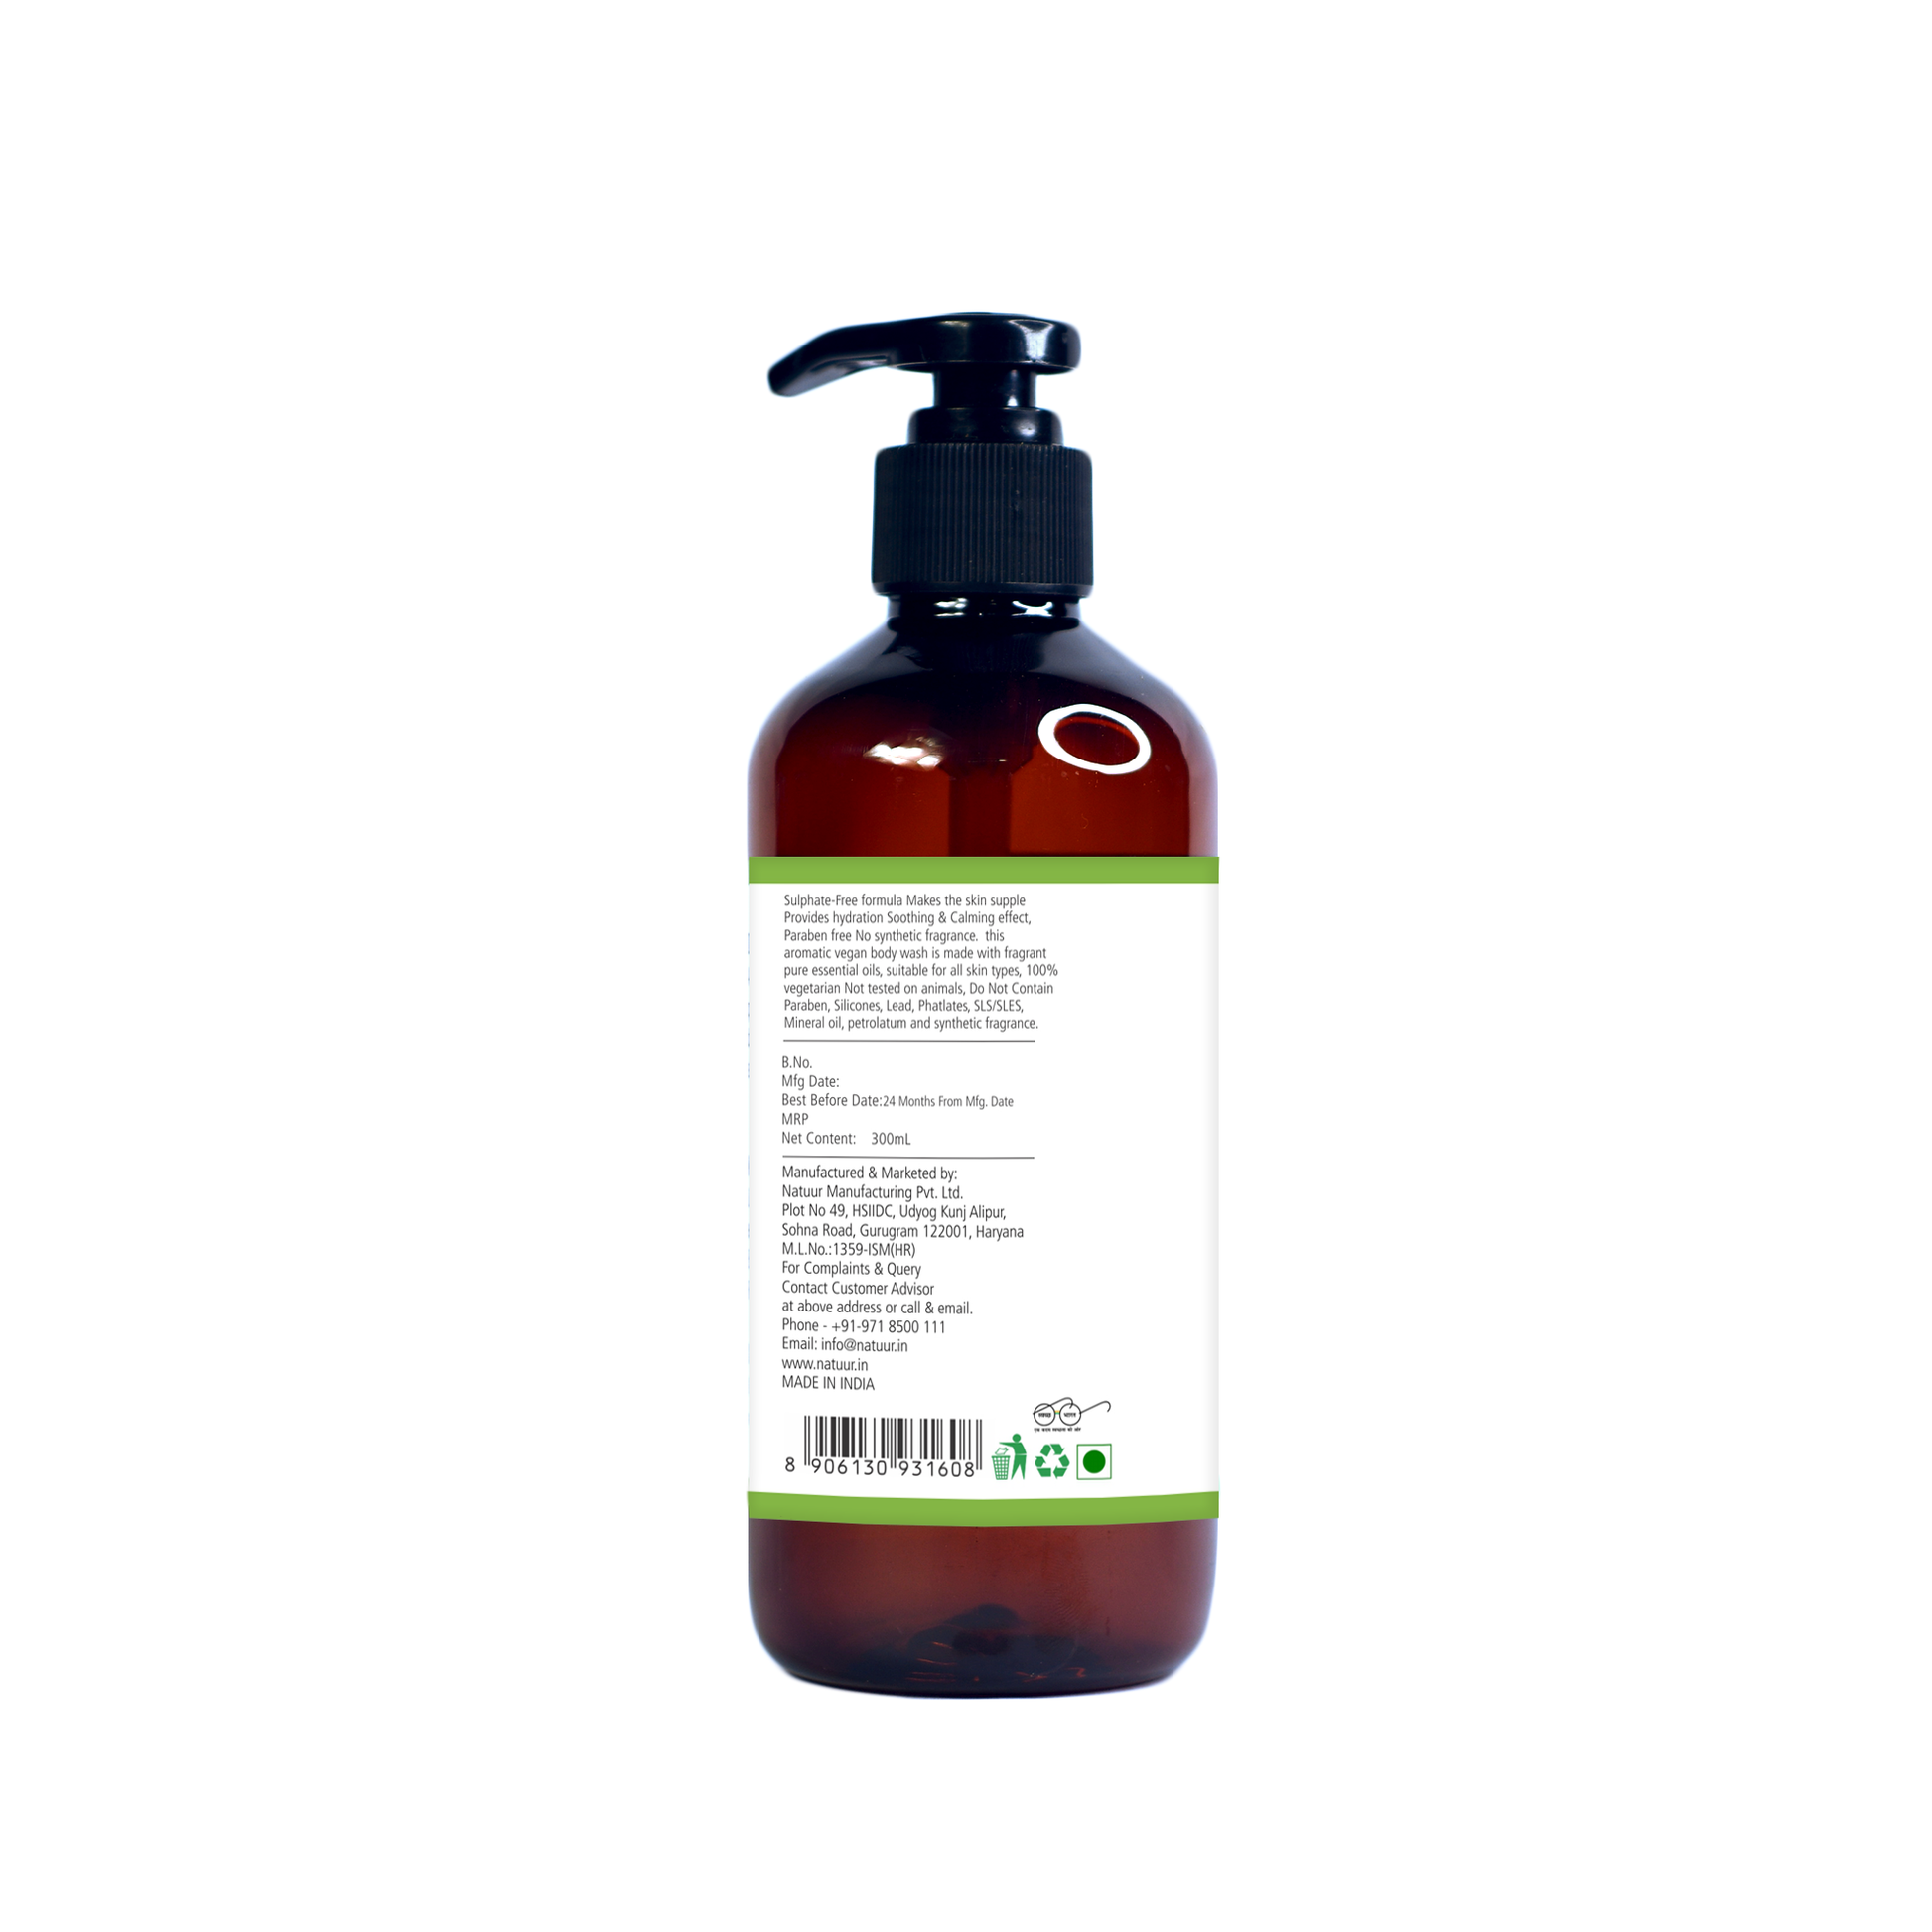 Unisex Intimate Hygiene Wash -Anti Bacterial Wash & Relaxant for Lingering Freshness 300mL - Natuur.in